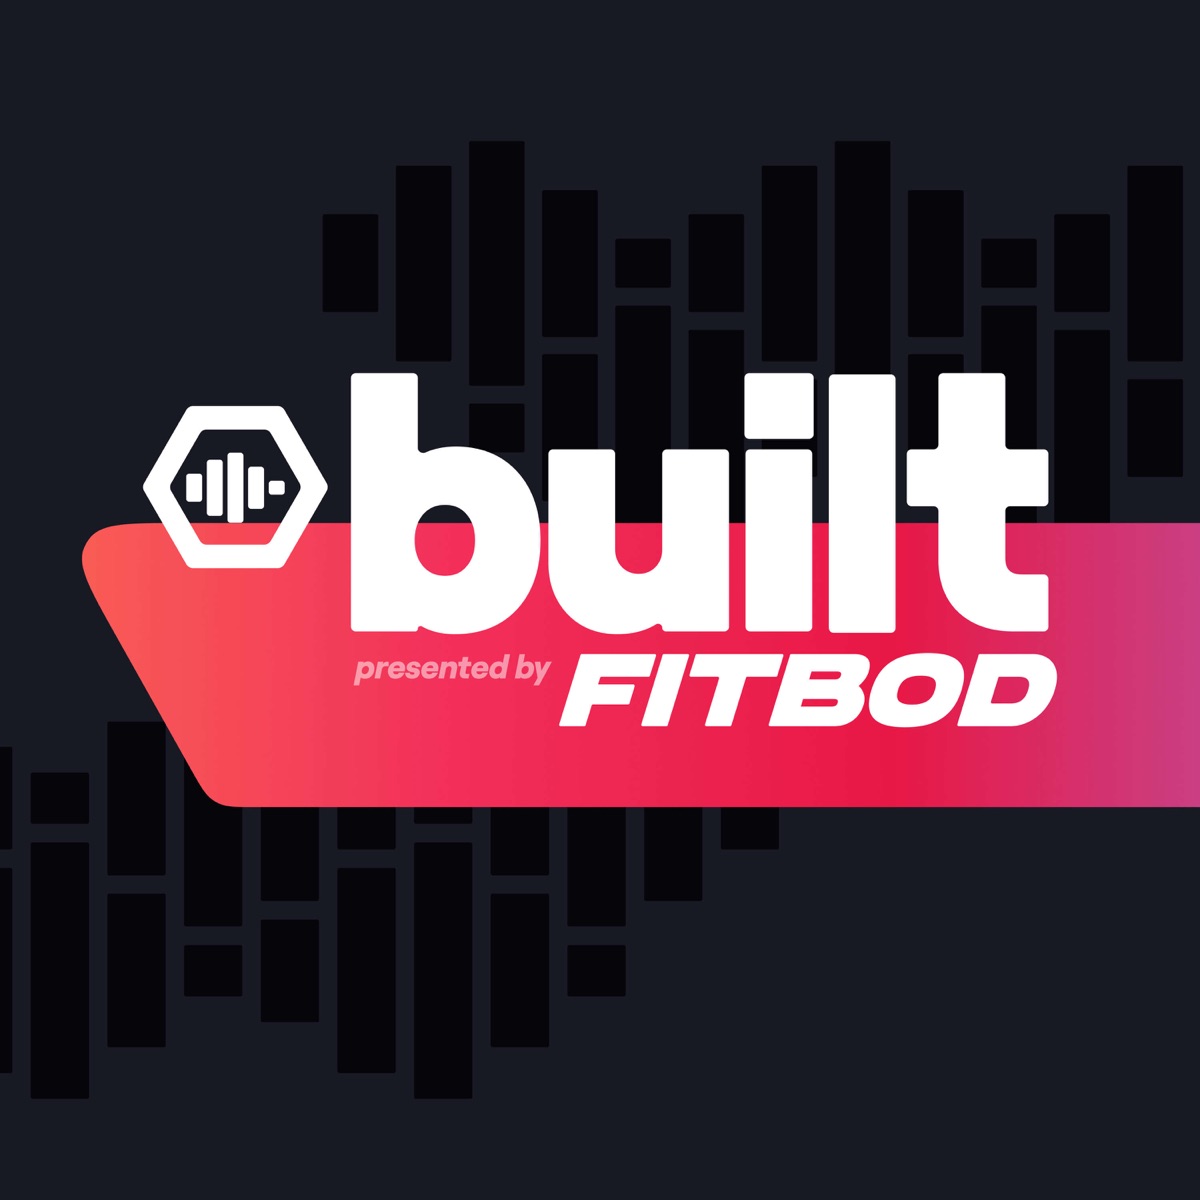 What Is A Typical Crossfit Workout? (Let's Break It Down) – Fitbod